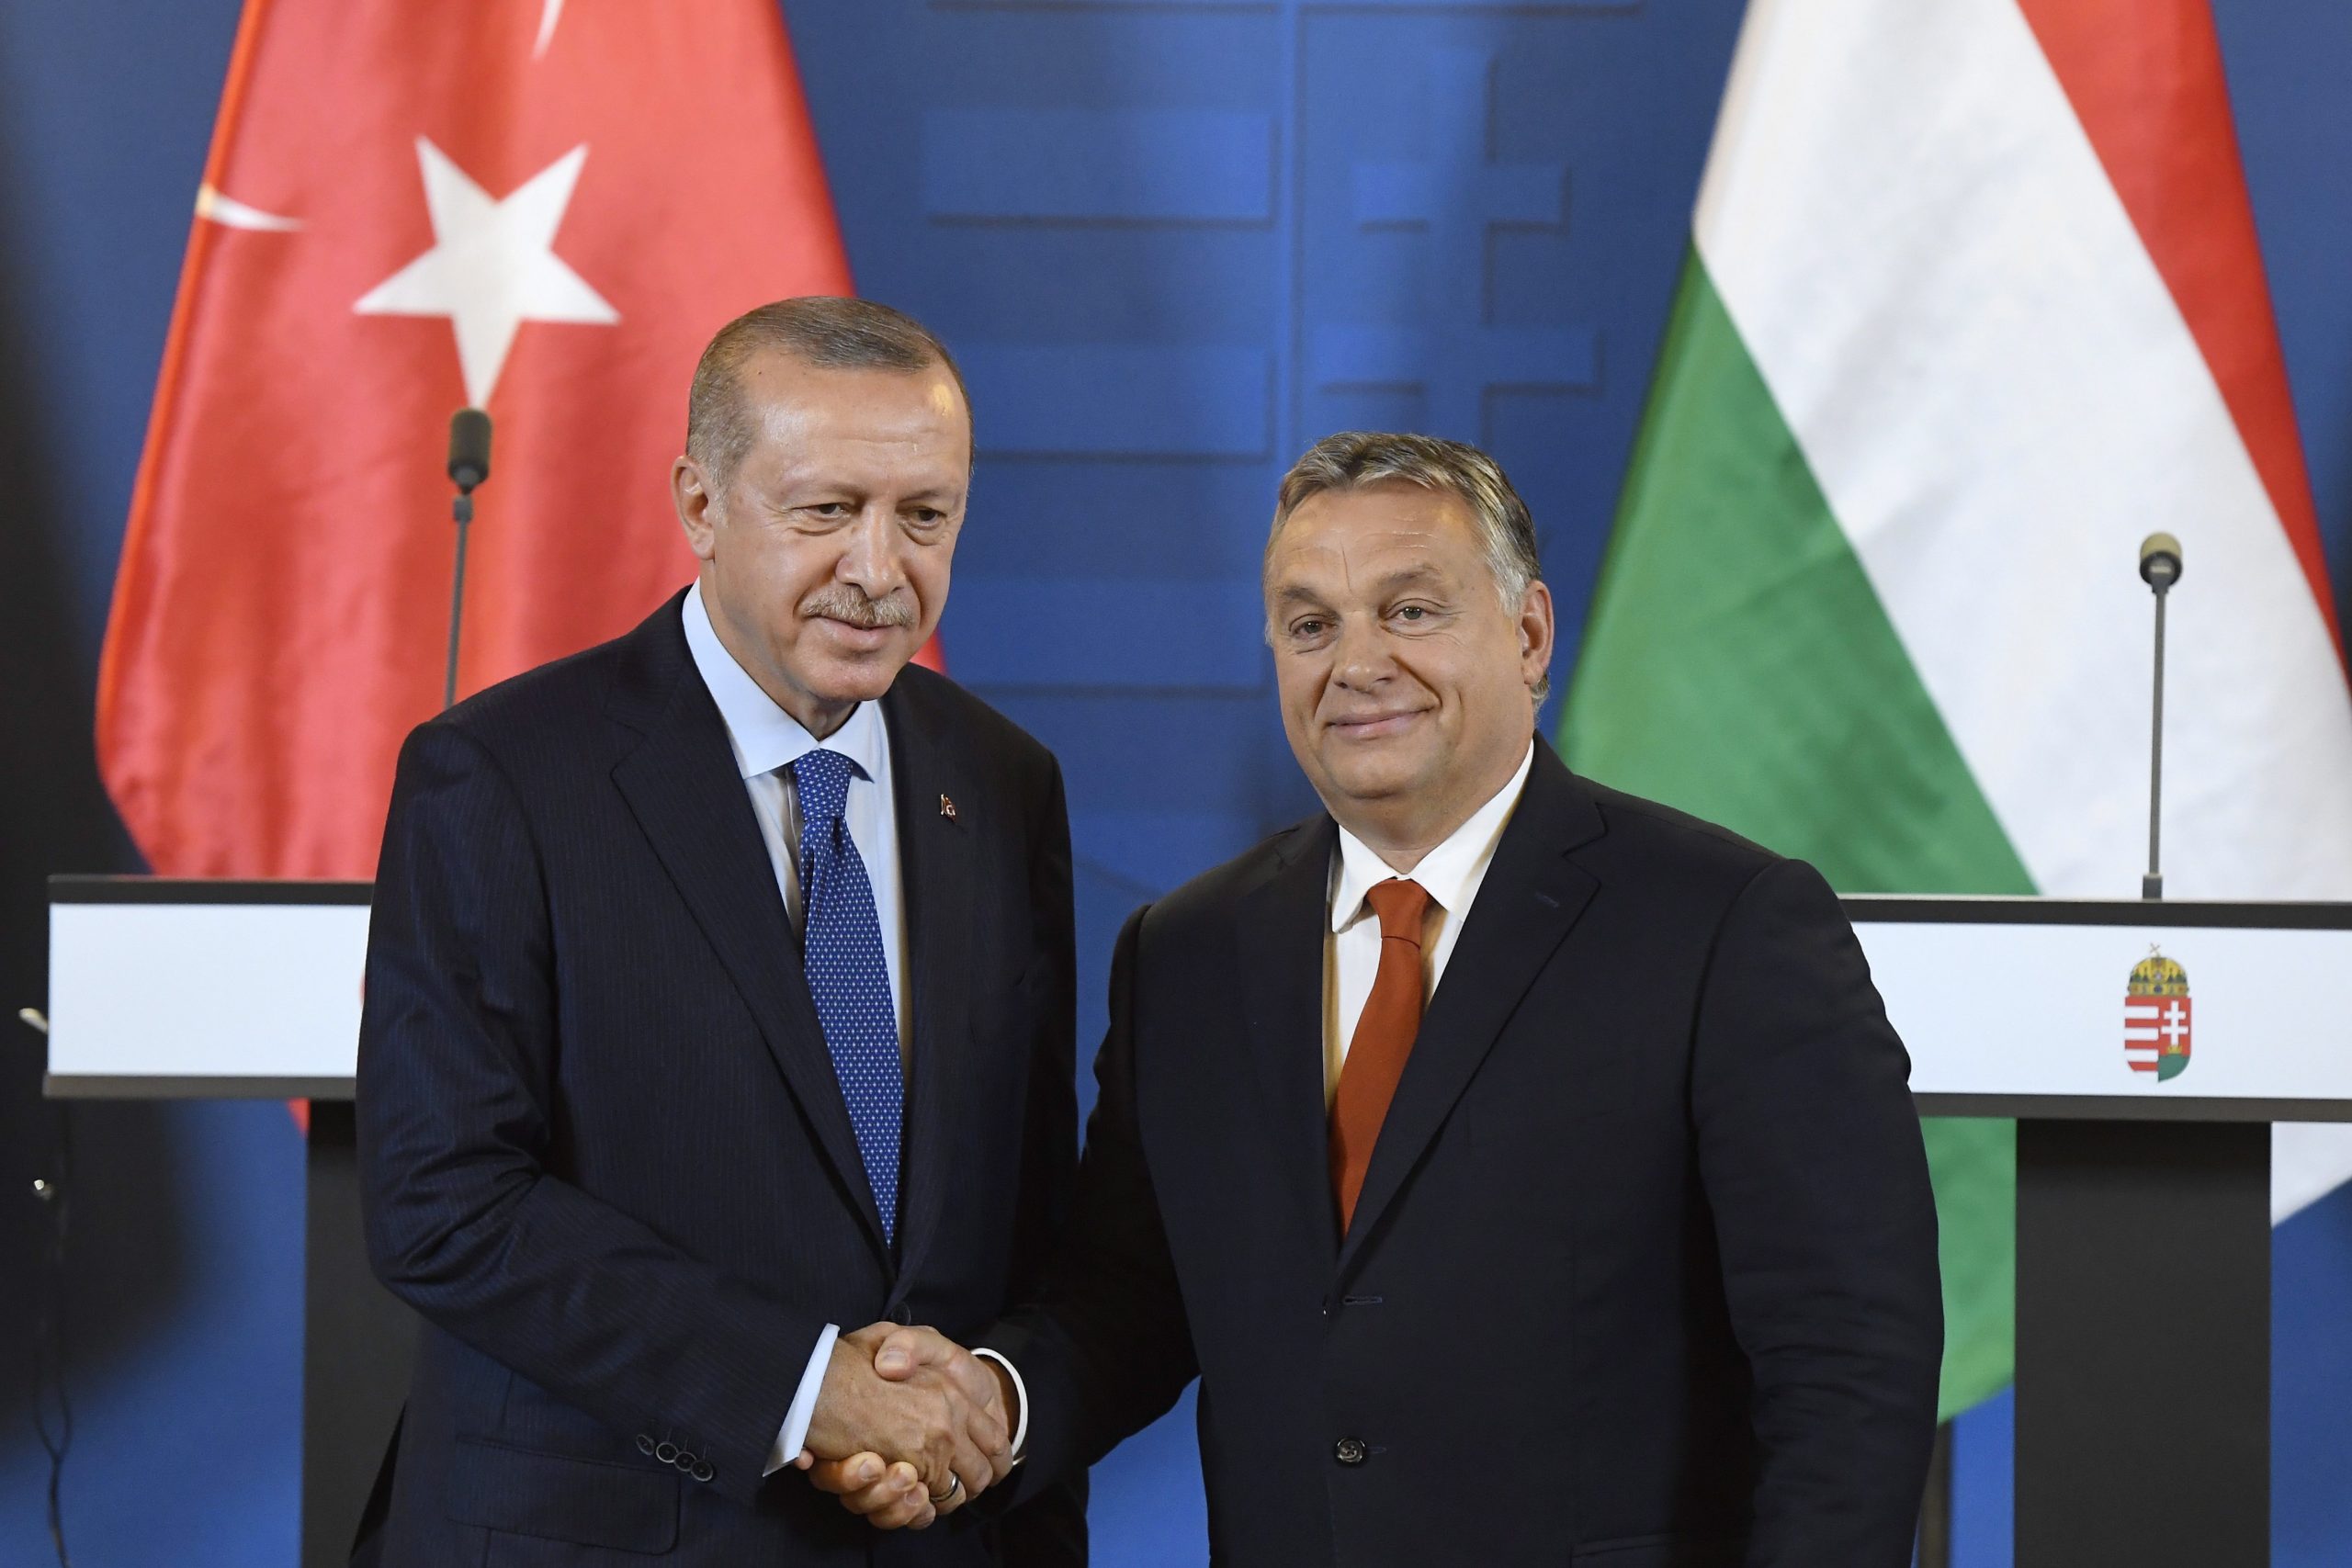 Turkish President Recep Tayyip Erdogan (L) and Hungarian Prime Minister Viktor Orban shake hands during the joint press conference following their meeting in the Parliament building in Budapest, Hungary, 08 October 2018. Erdogan is paying a two-day official visit to Hungary.  EPA/SZILARD KOSZTICSAK HUNGARY OUT